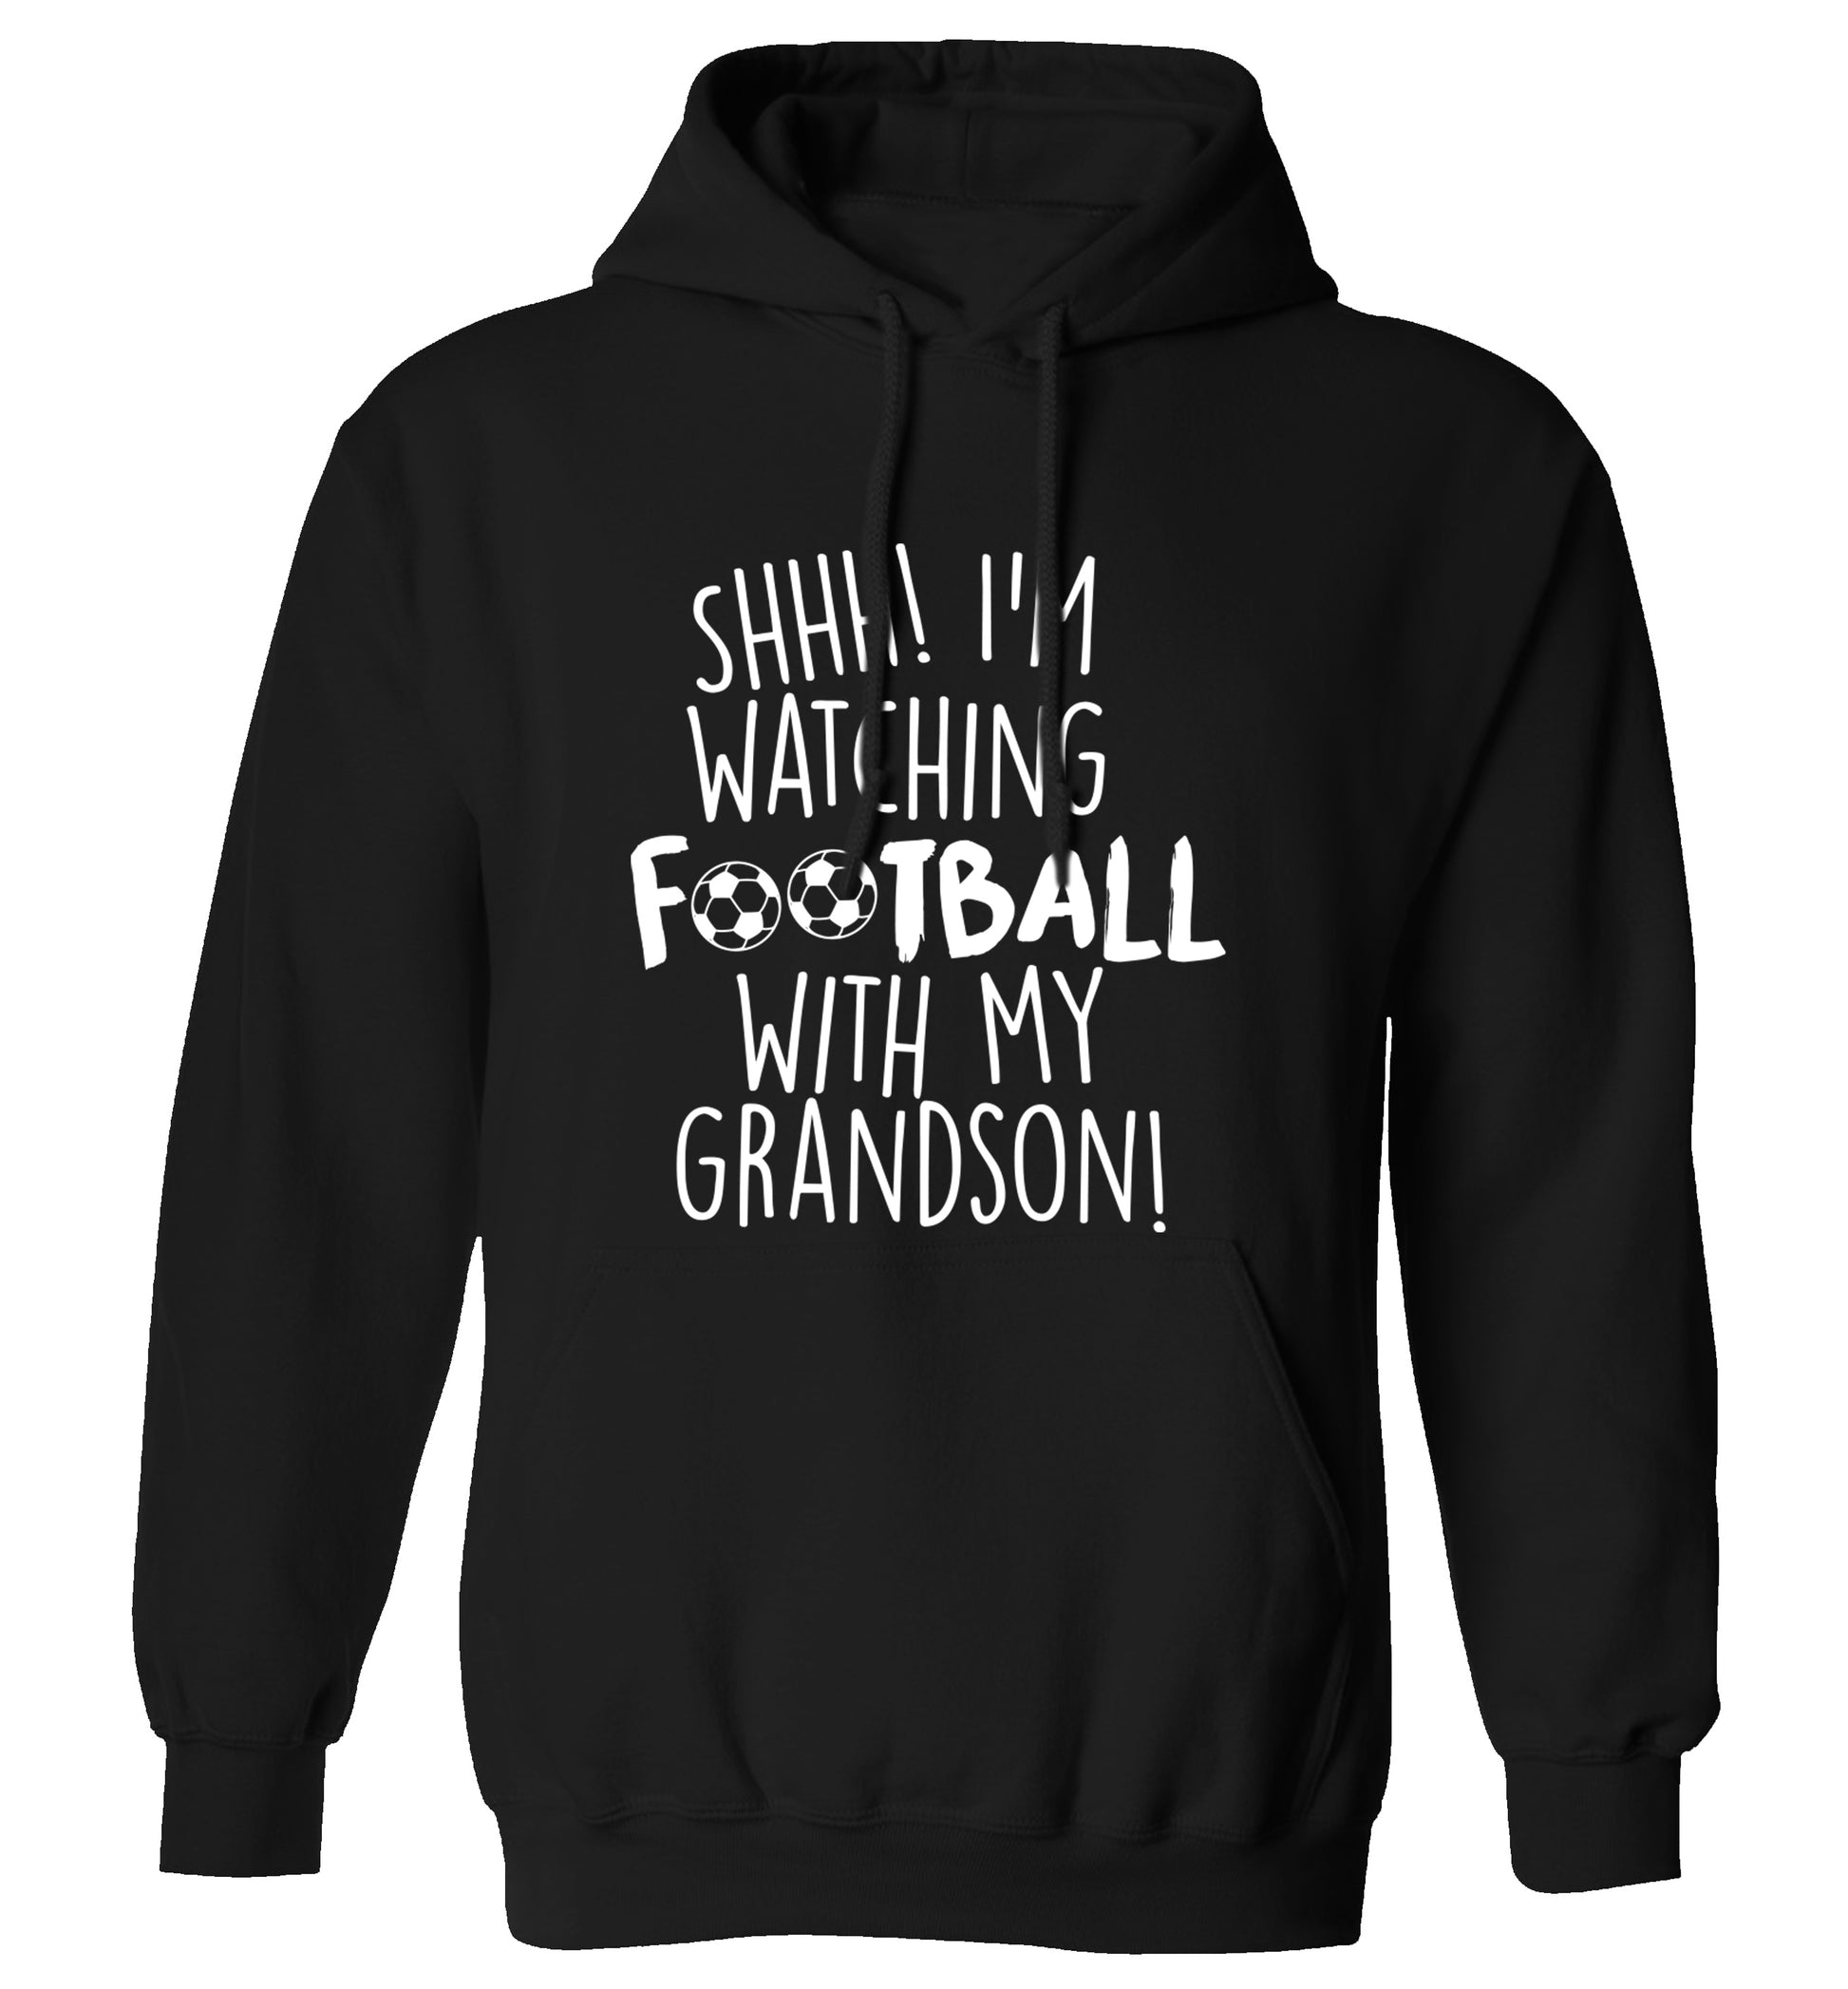 Shhh I'm watching football with my grandson adults unisexblack hoodie 2XL